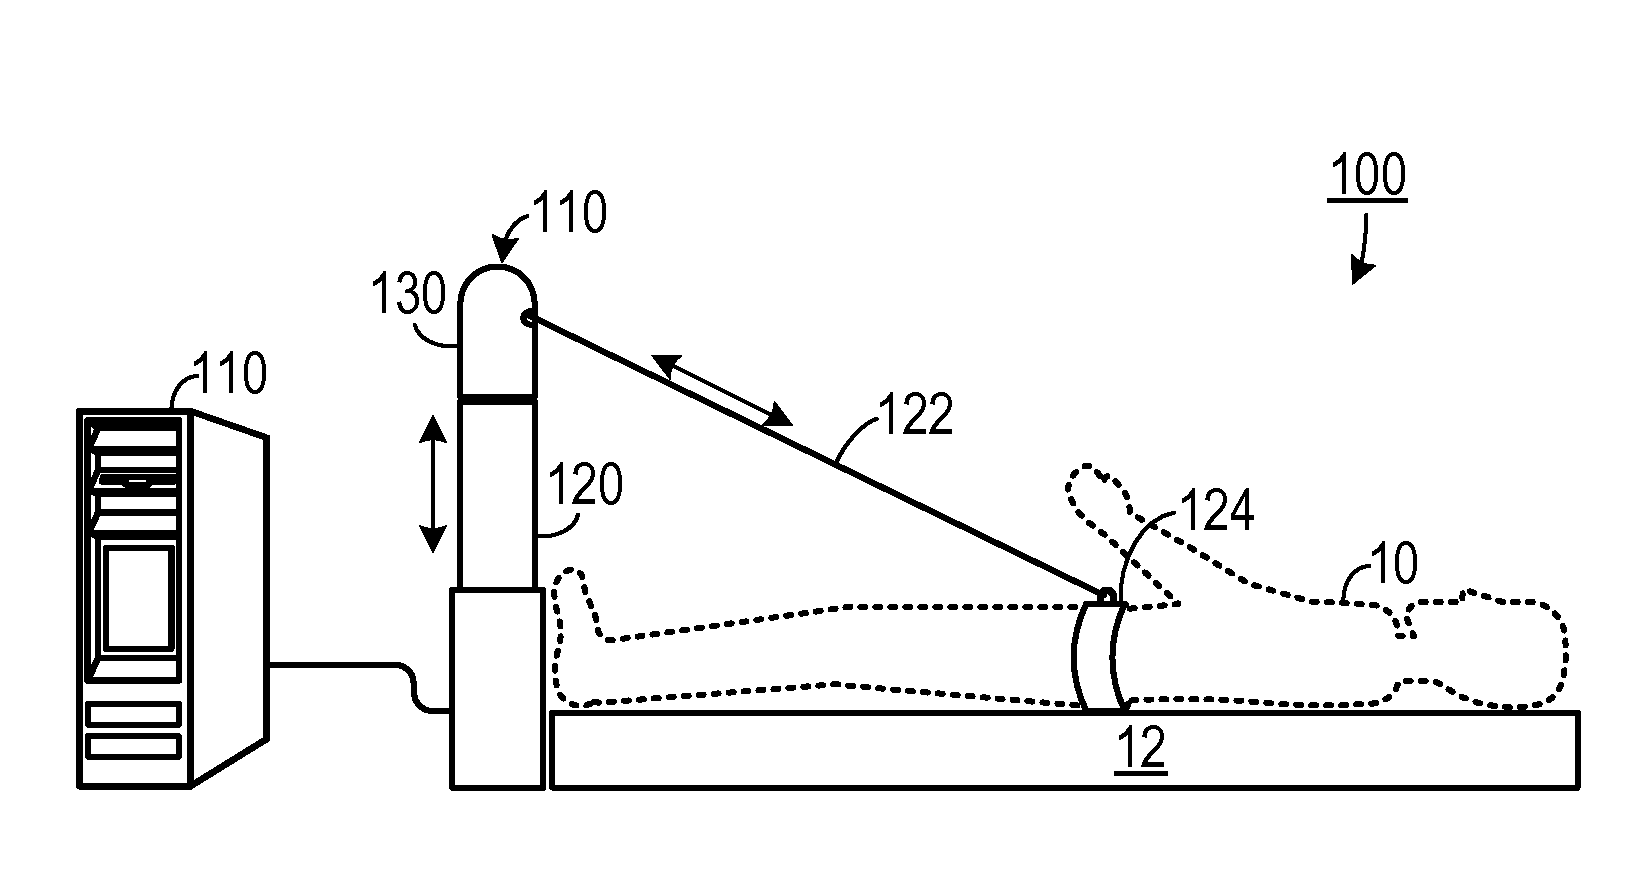 Spinal distraction device with three dimensionally vibrating matrix head